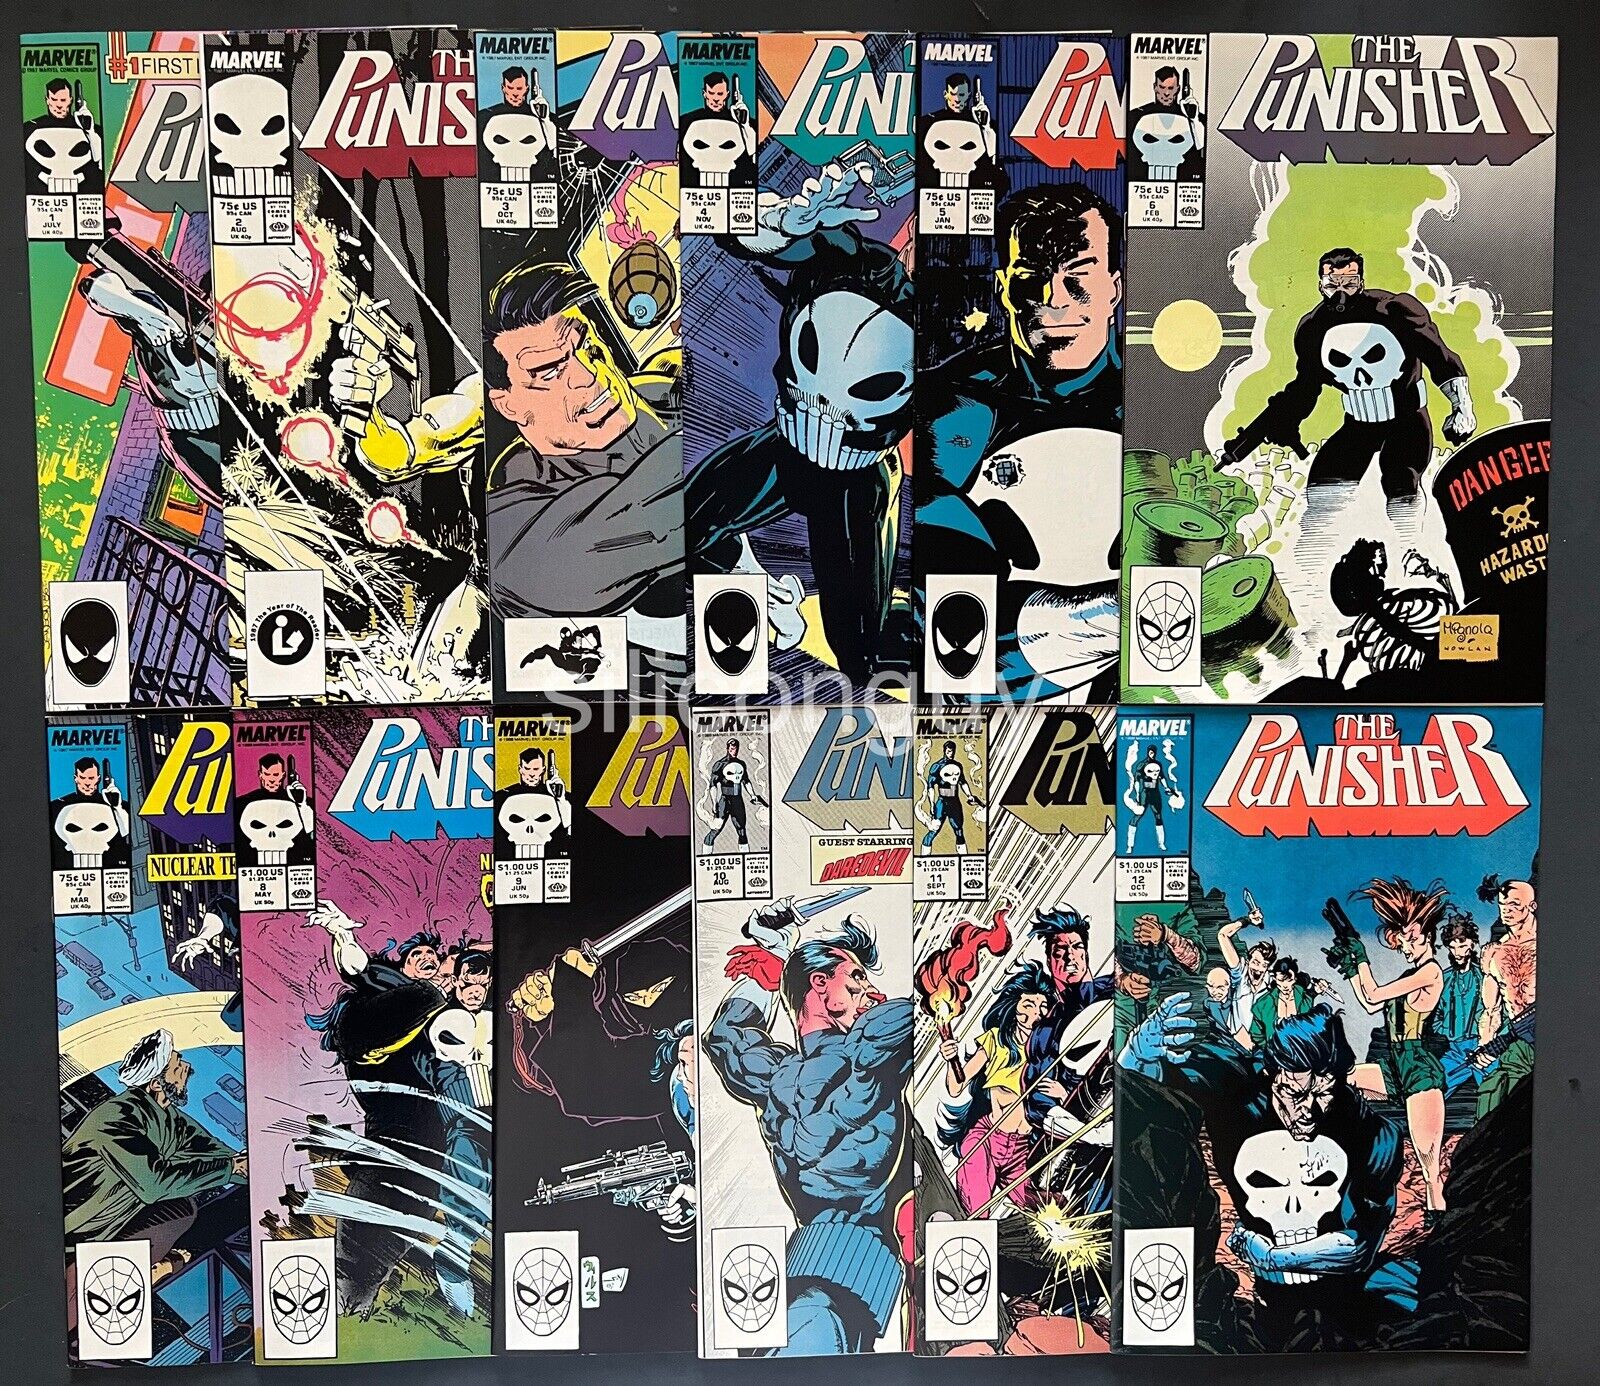 The Punisher #1-26, Annual #1-2, Lot 1987 Very Fine - Near Mint Marvel Comics